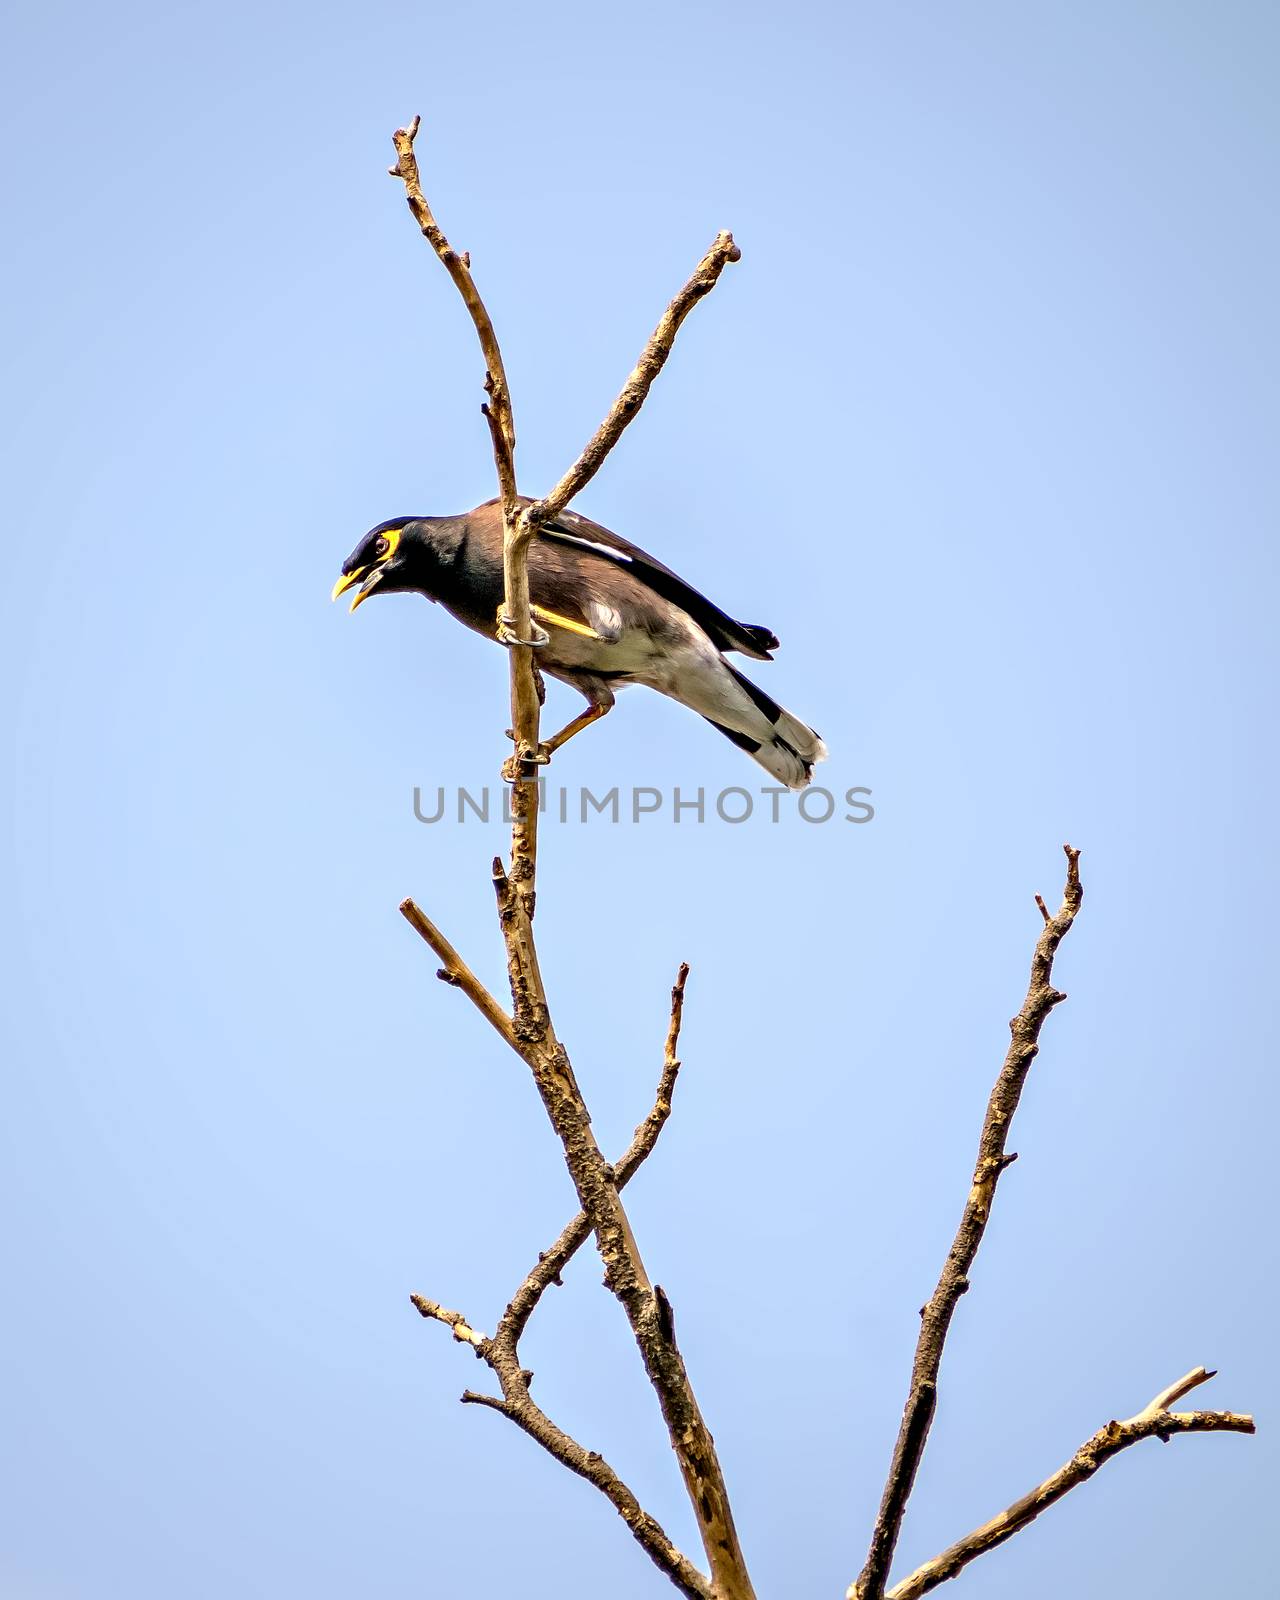 Common Myna bird sitting & shouting on a dry tree branch with clear blue sky background.